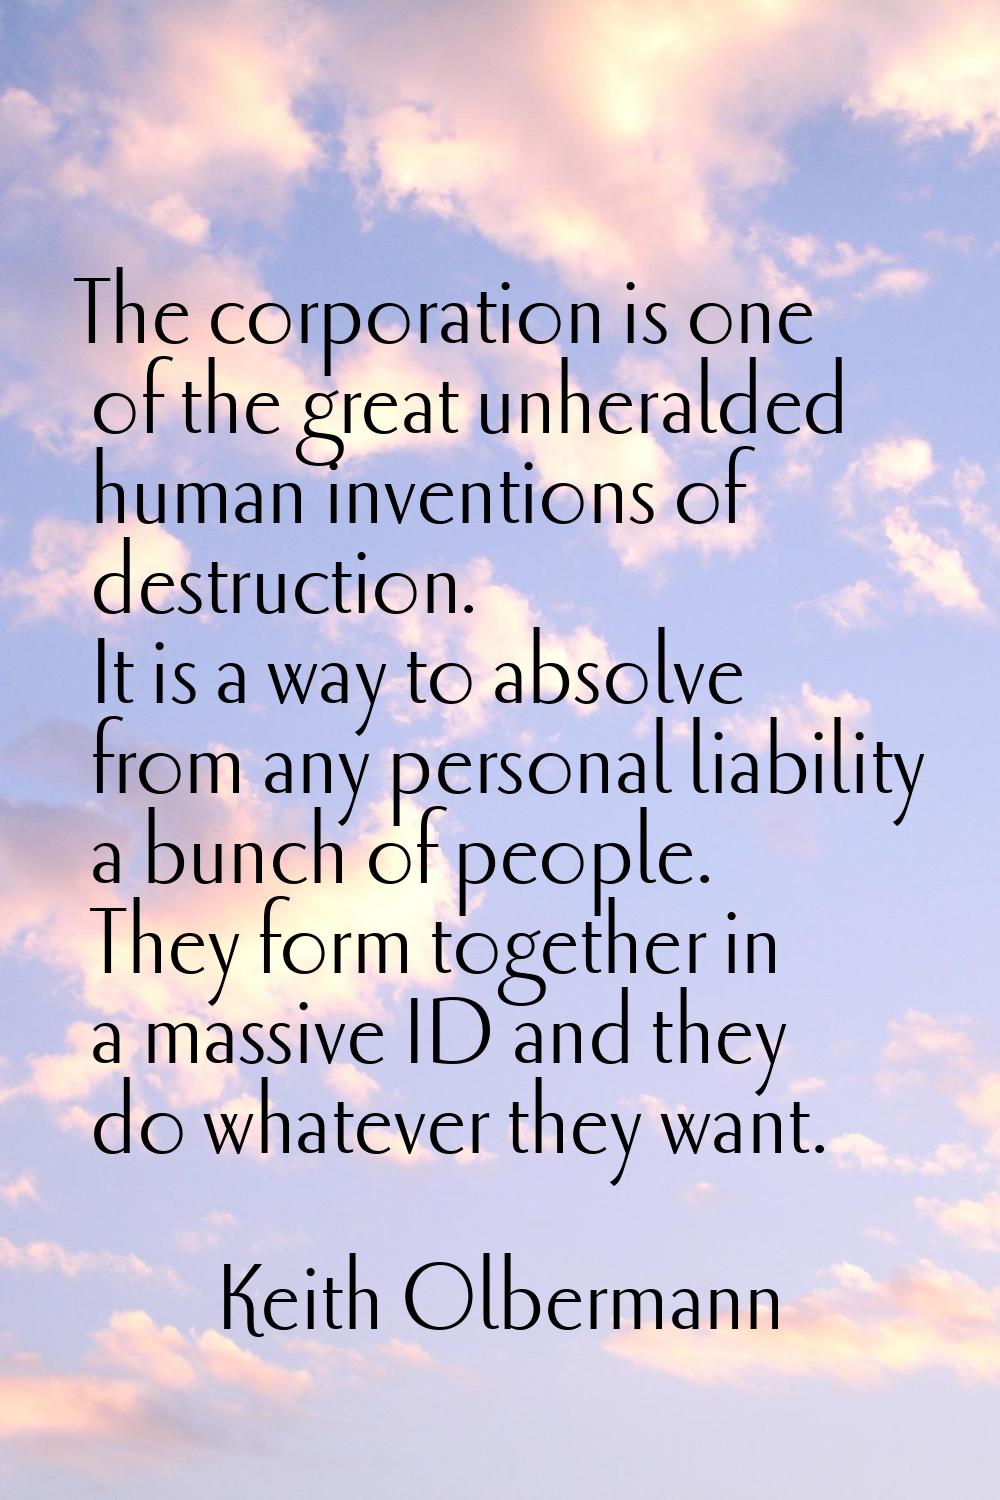 The corporation is one of the great unheralded human inventions of destruction. It is a way to abso